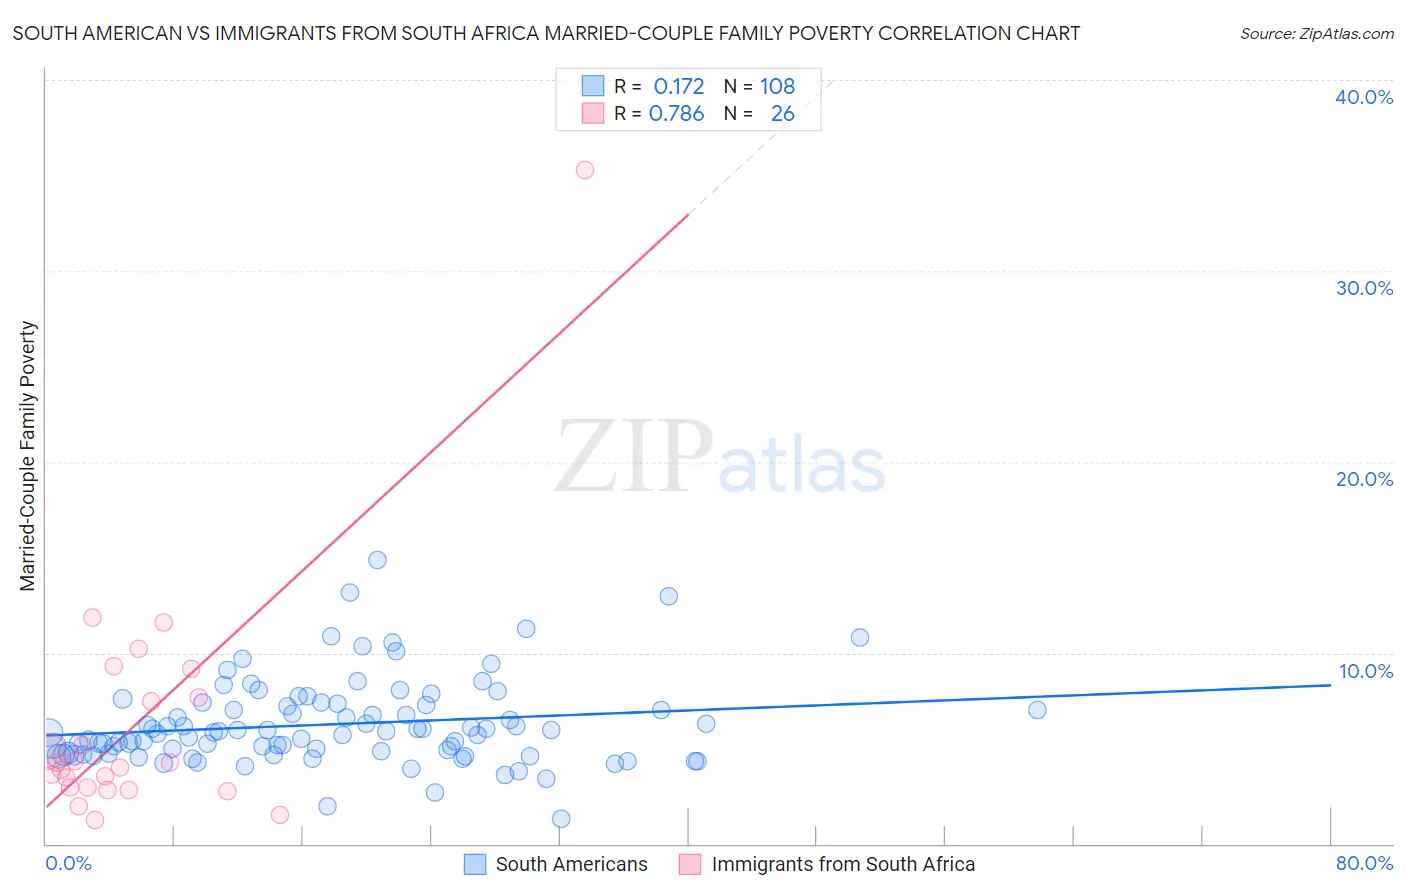 South American vs Immigrants from South Africa Married-Couple Family Poverty